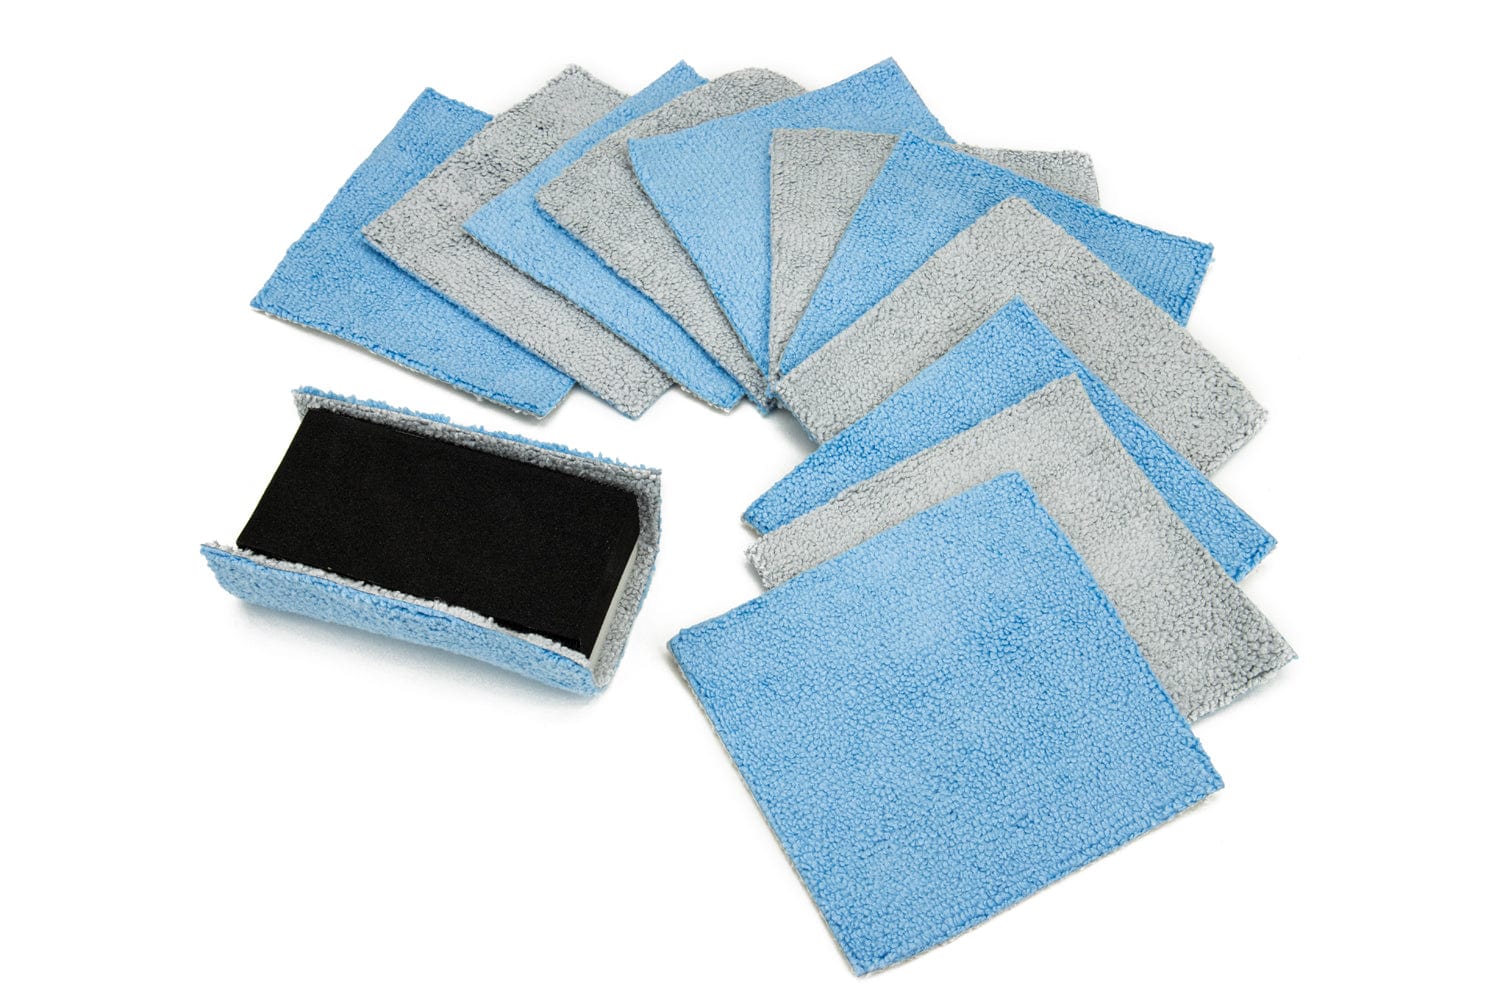 Autofiber Applicator 1 Block + 12 Blue/Gray Sheets [Saver Block & Refill] Coating Applicator Foam Block with Size Velcro and Refill Saver Sheets with Barrier Layer (3.5 in. x 2 in. x 1 in.) - 12 pack